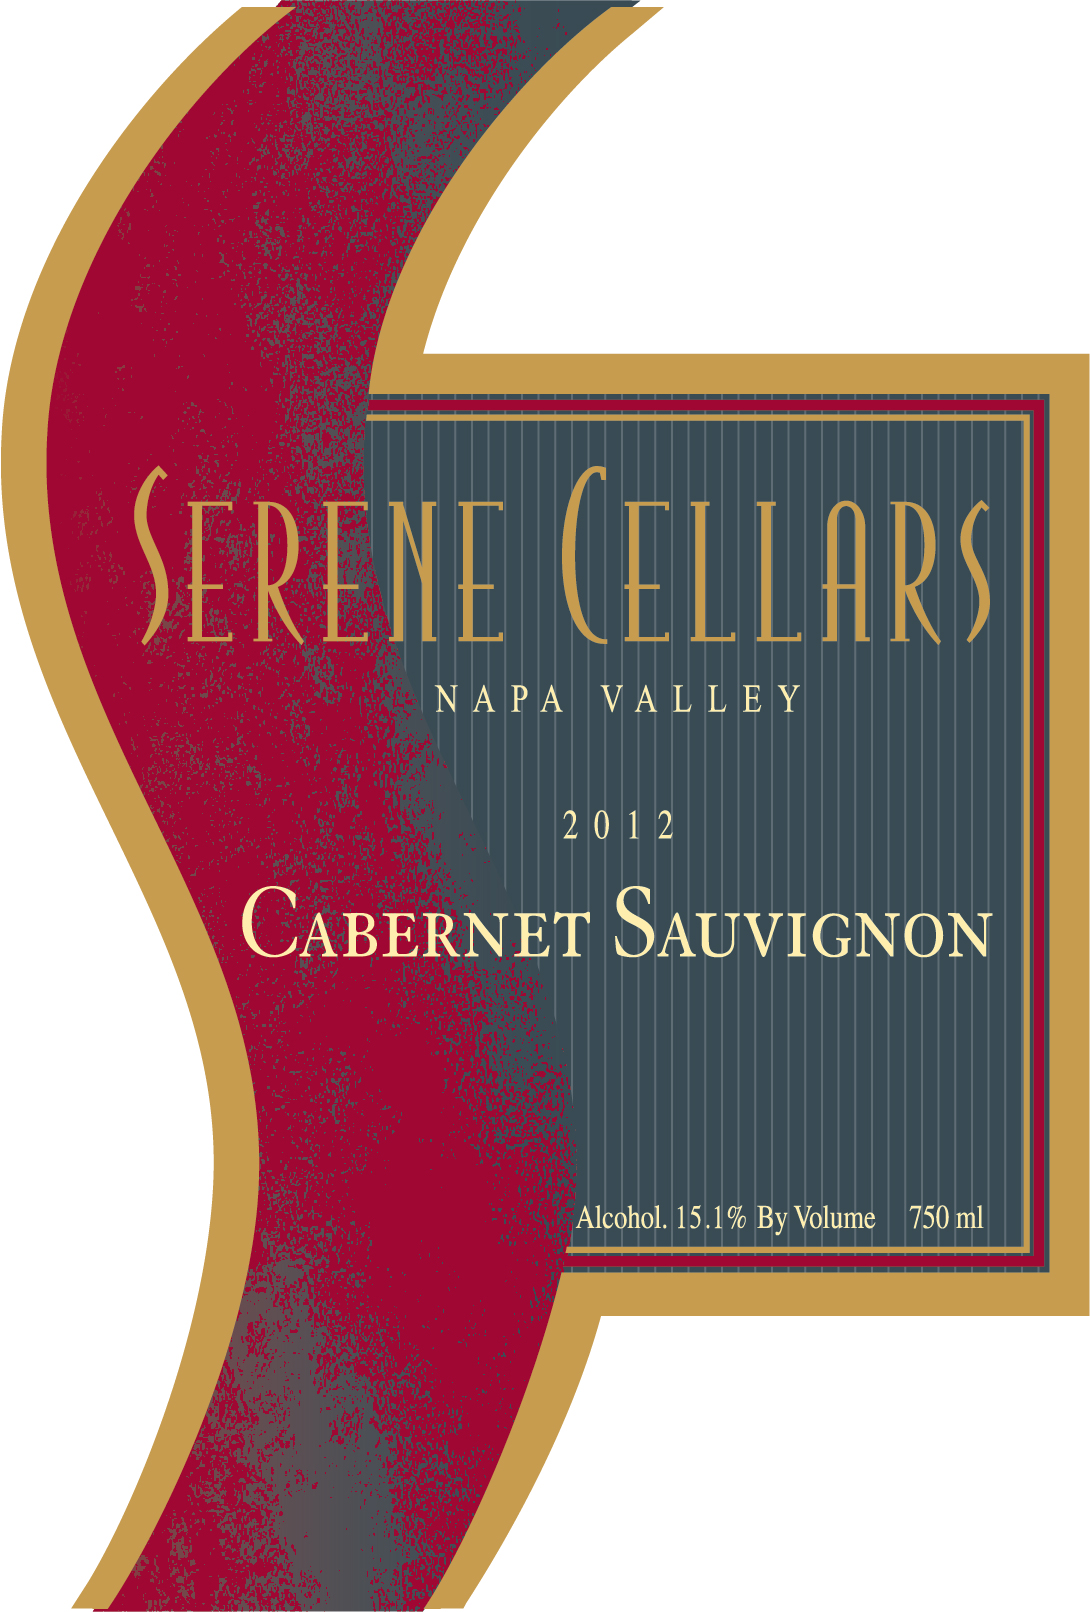 Product Image for 2012 Pope Valley Cabernet Sauvignon "Persuasion"